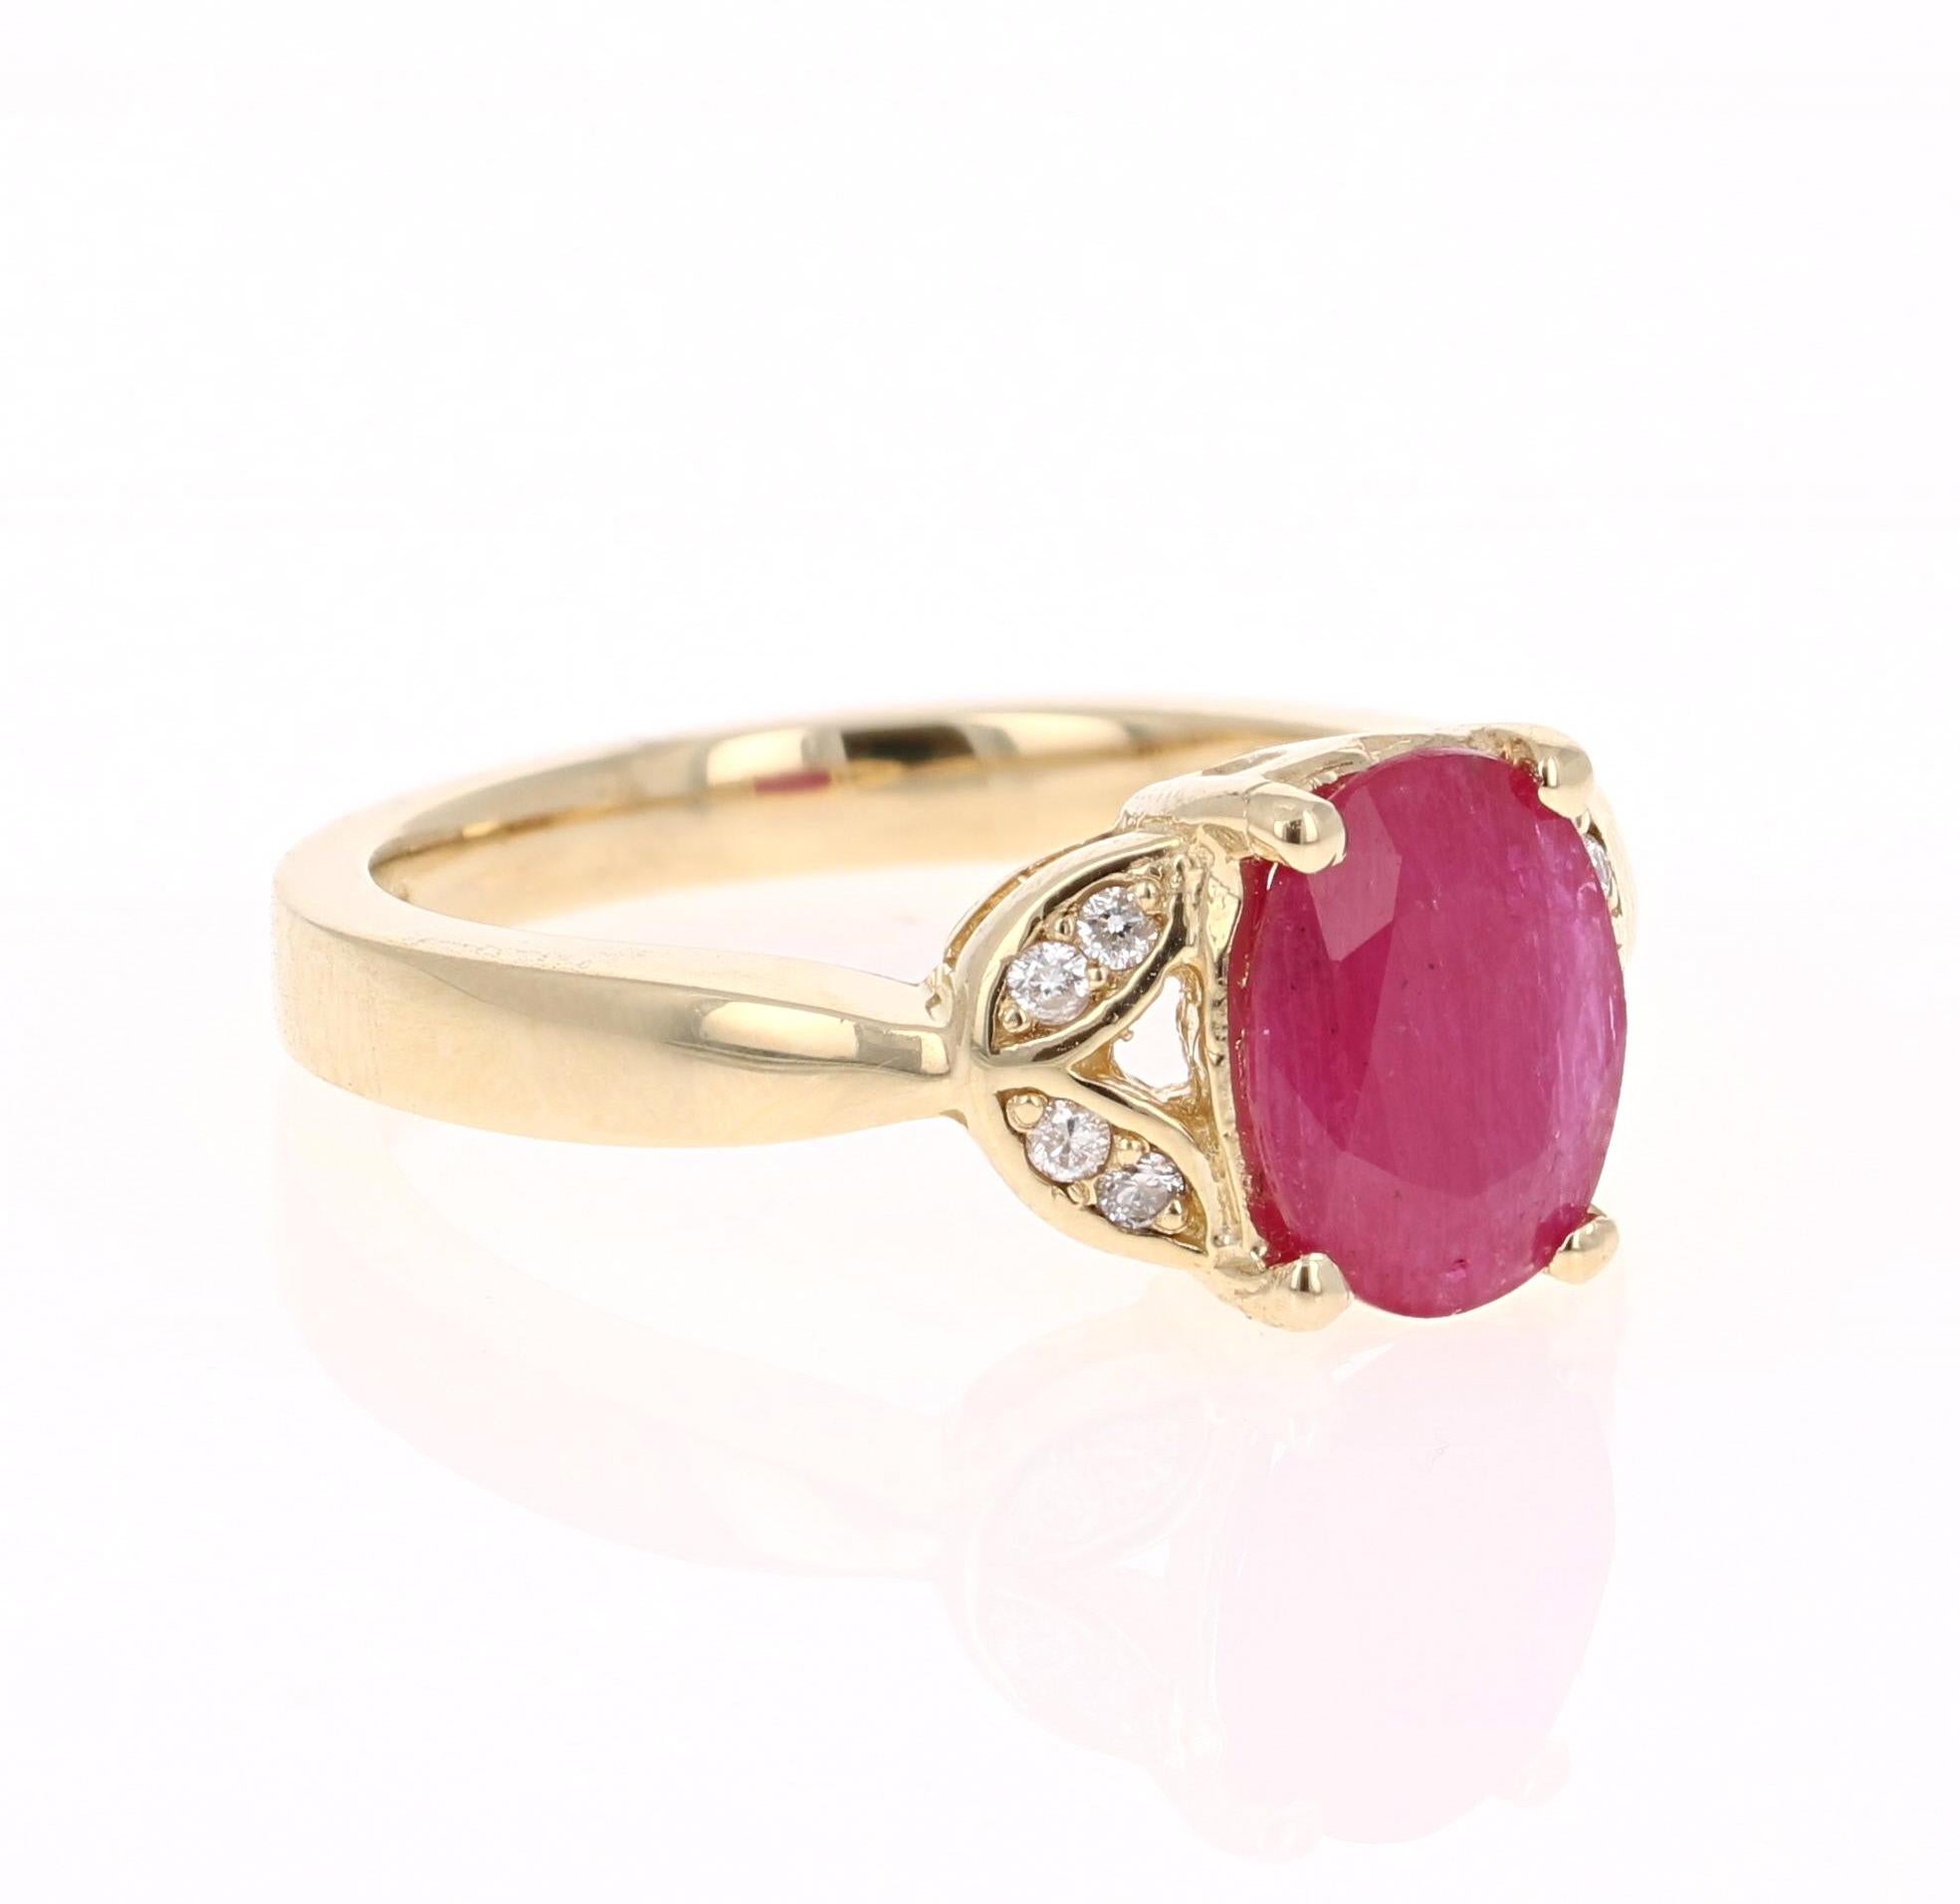 Simply beautiful Ruby Diamond Ring with a Oval Cut 1.75 Carat Ruby which is surrounded by 8 Round Cut Diamonds that weigh 0.08 carats. The total carat weight of the ring is 1.83 carats. 

The ring is curated in 14K Yellow Gold and weighs